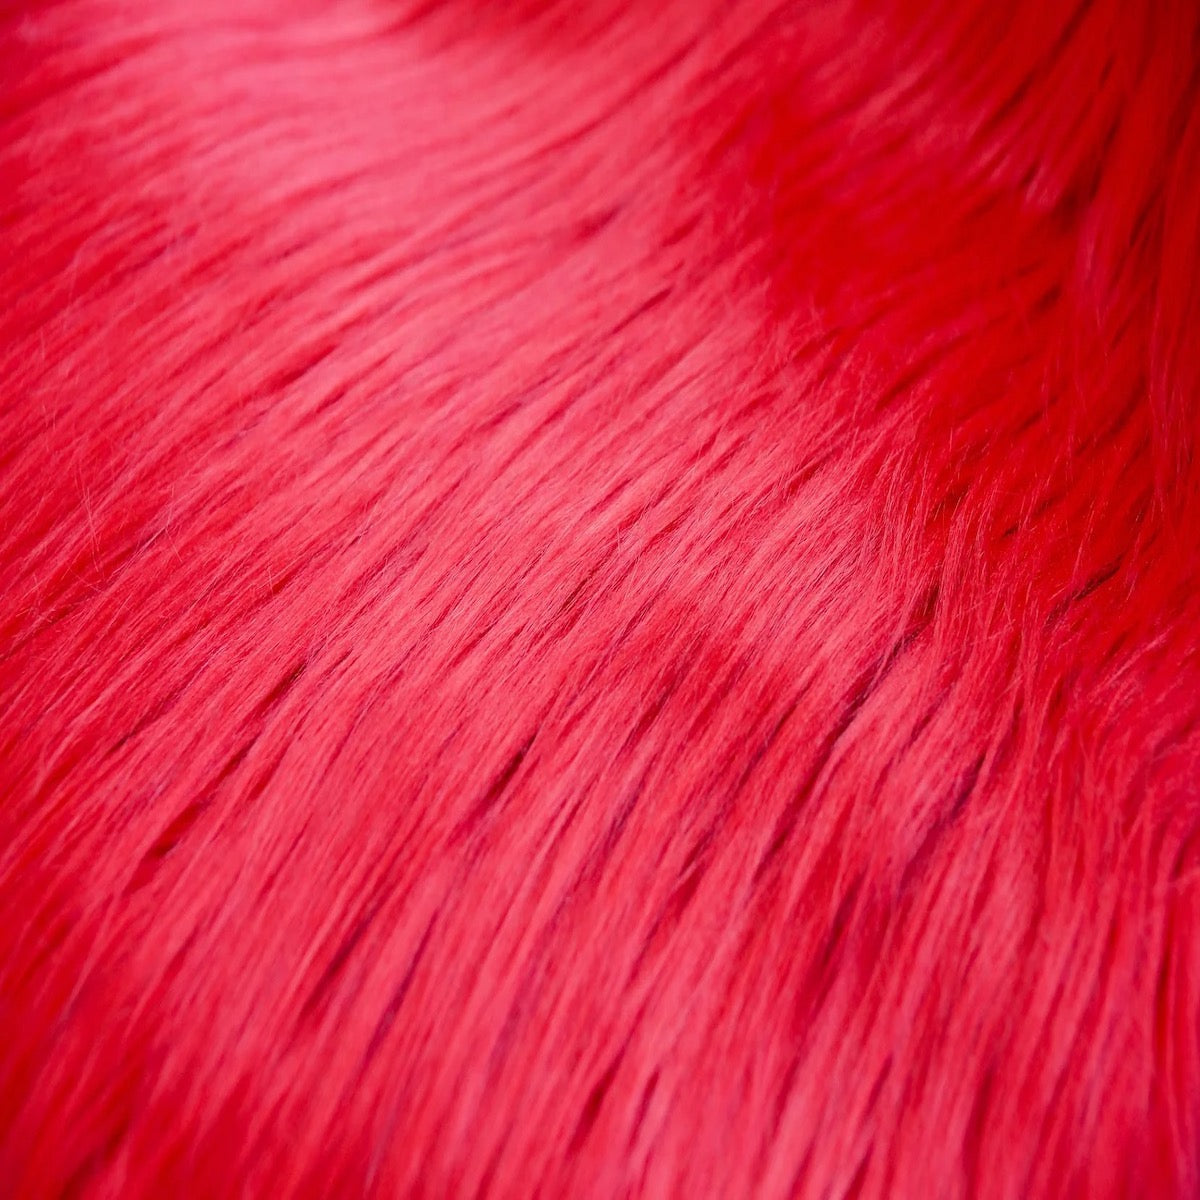 Red Shaggy Long Pile Faux Fur Fabric (4)